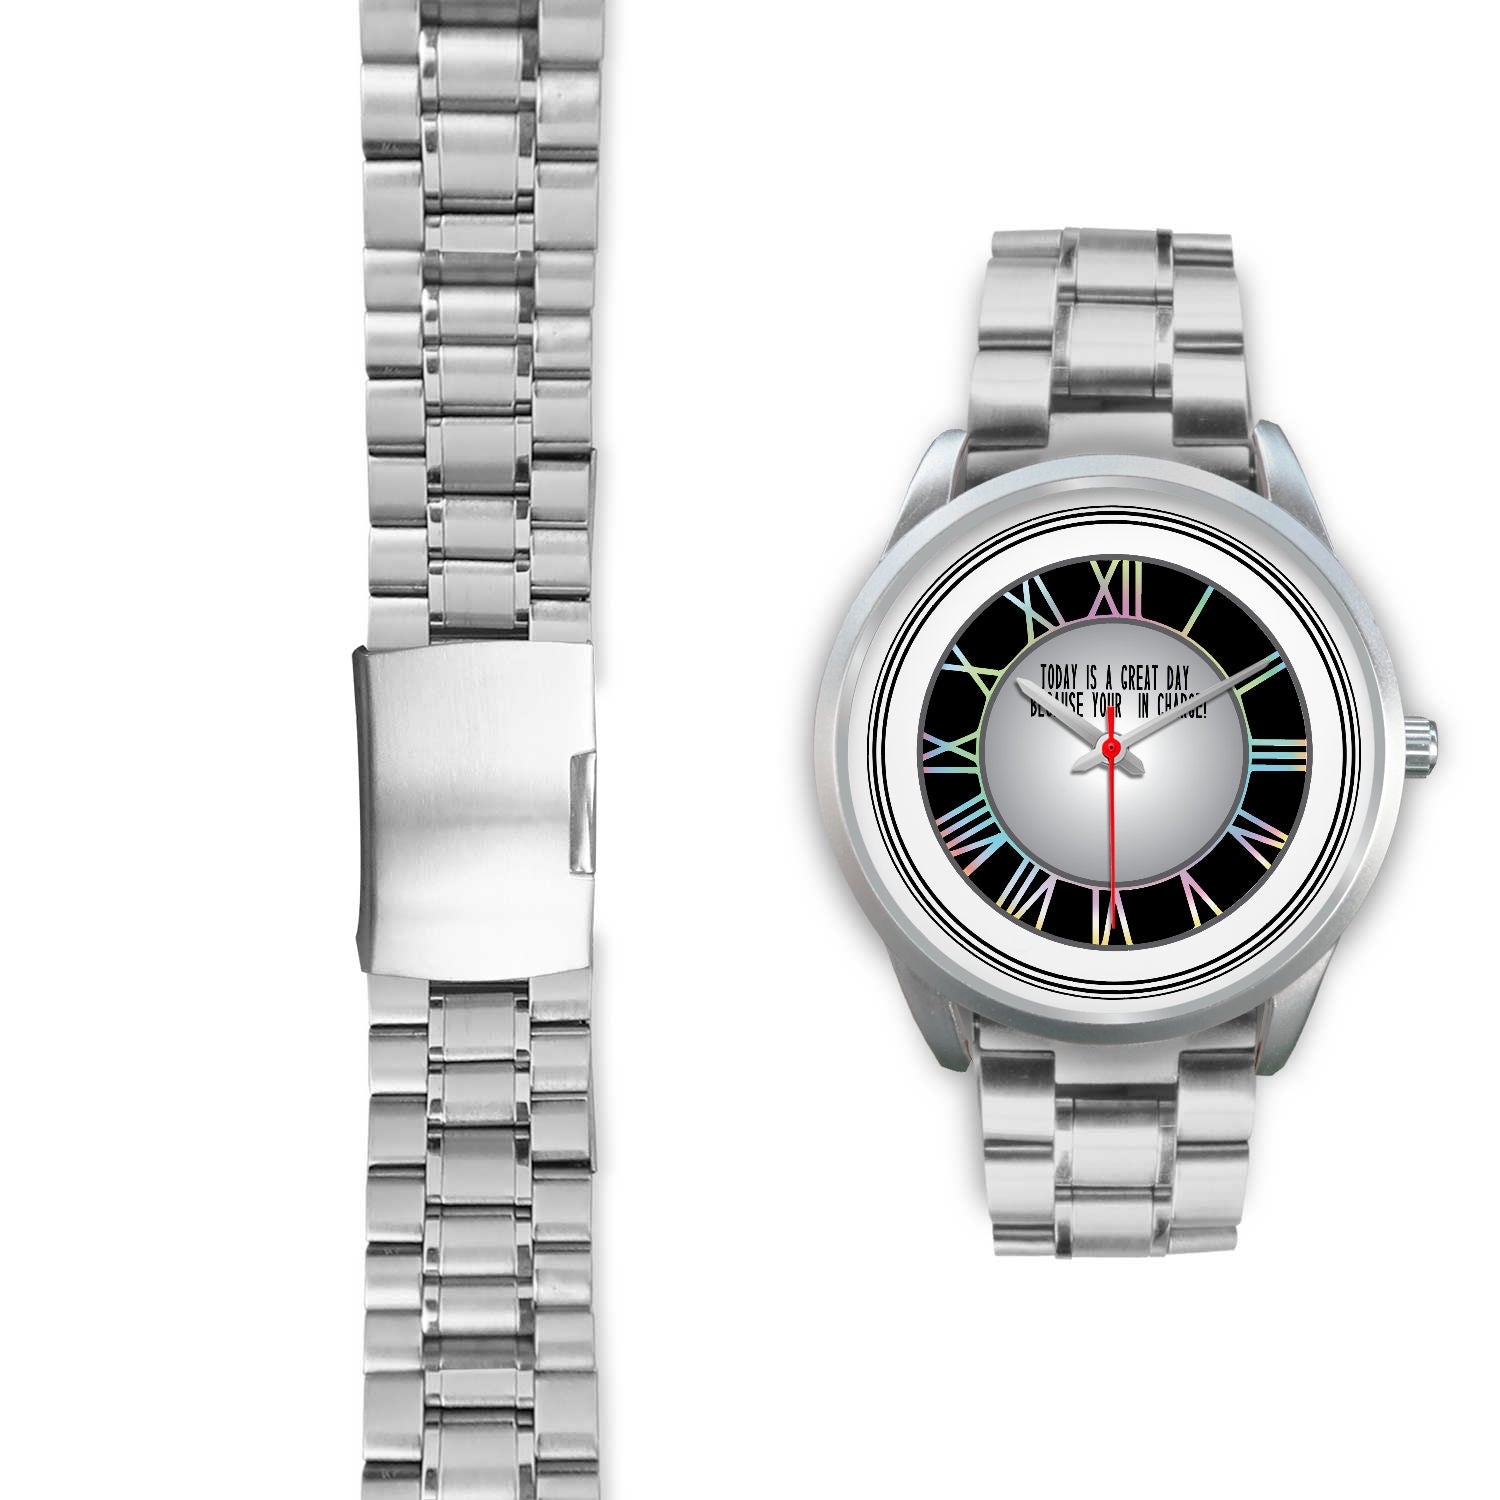 Today Is A Good Day Because Your In Charge Silver Watch Options-Silver Watch-Digital Rawness